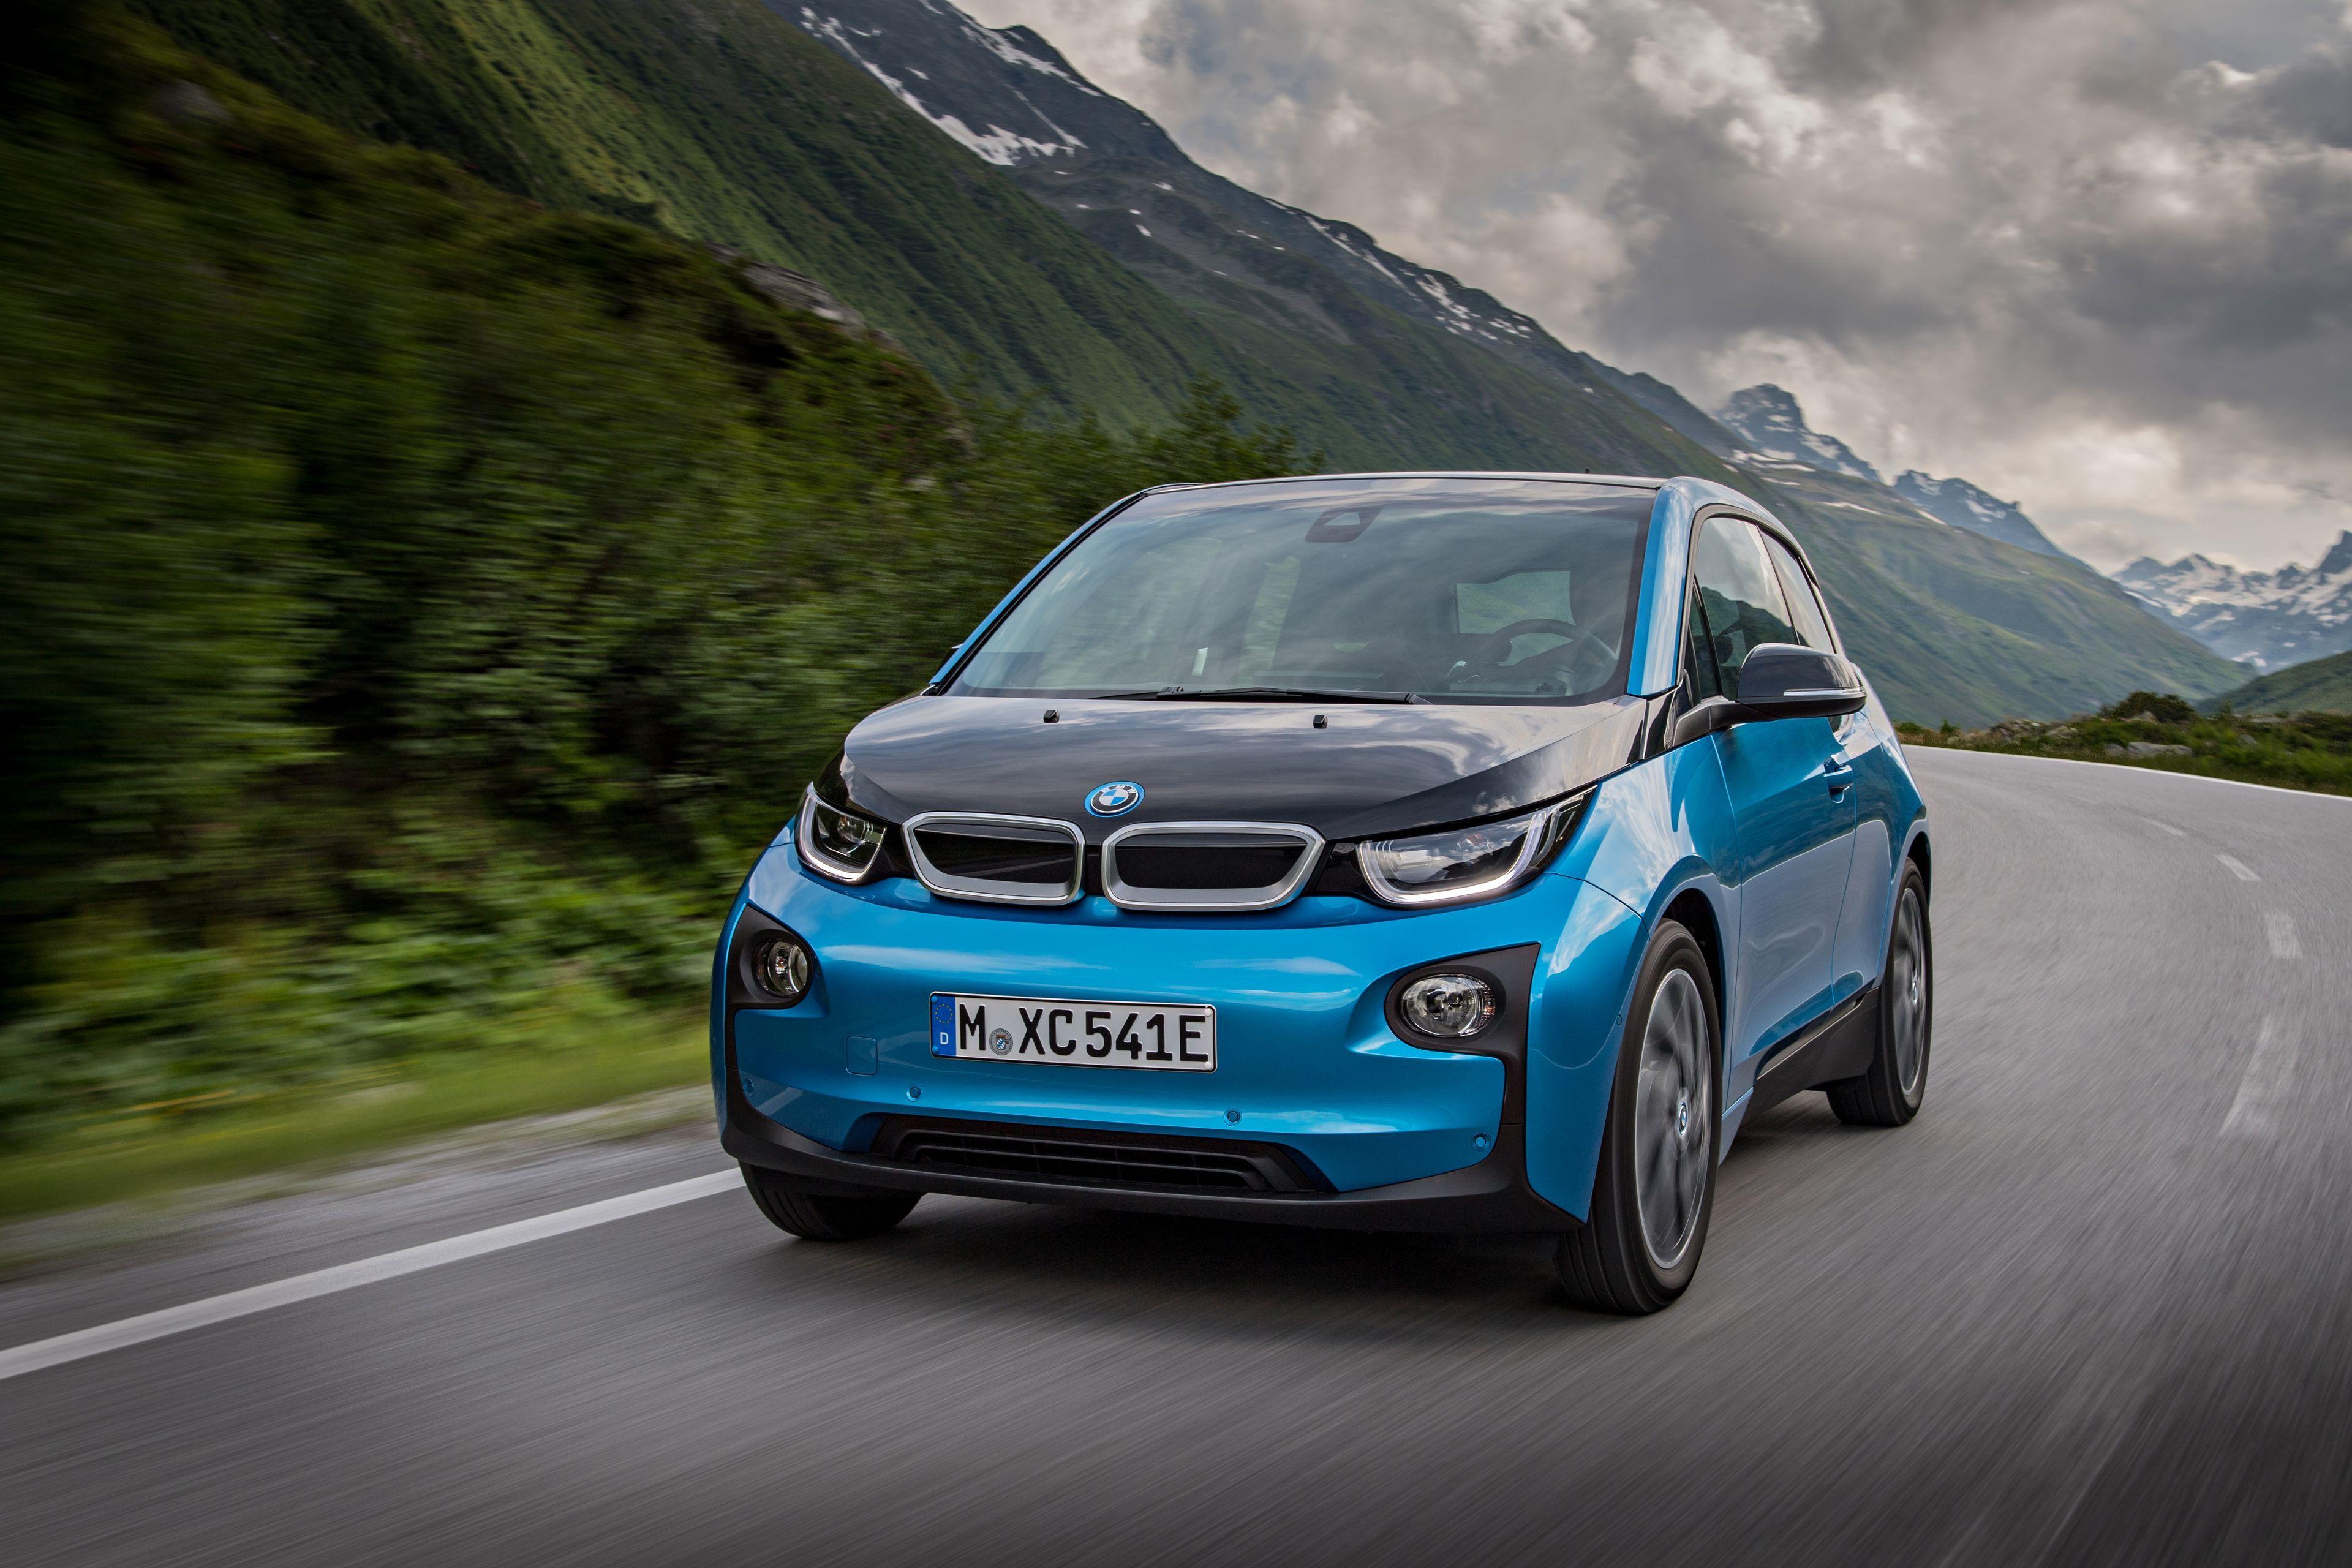 Bmw I3 Wallpapers Top Free Bmw I3 Backgrounds Wallpaperaccess